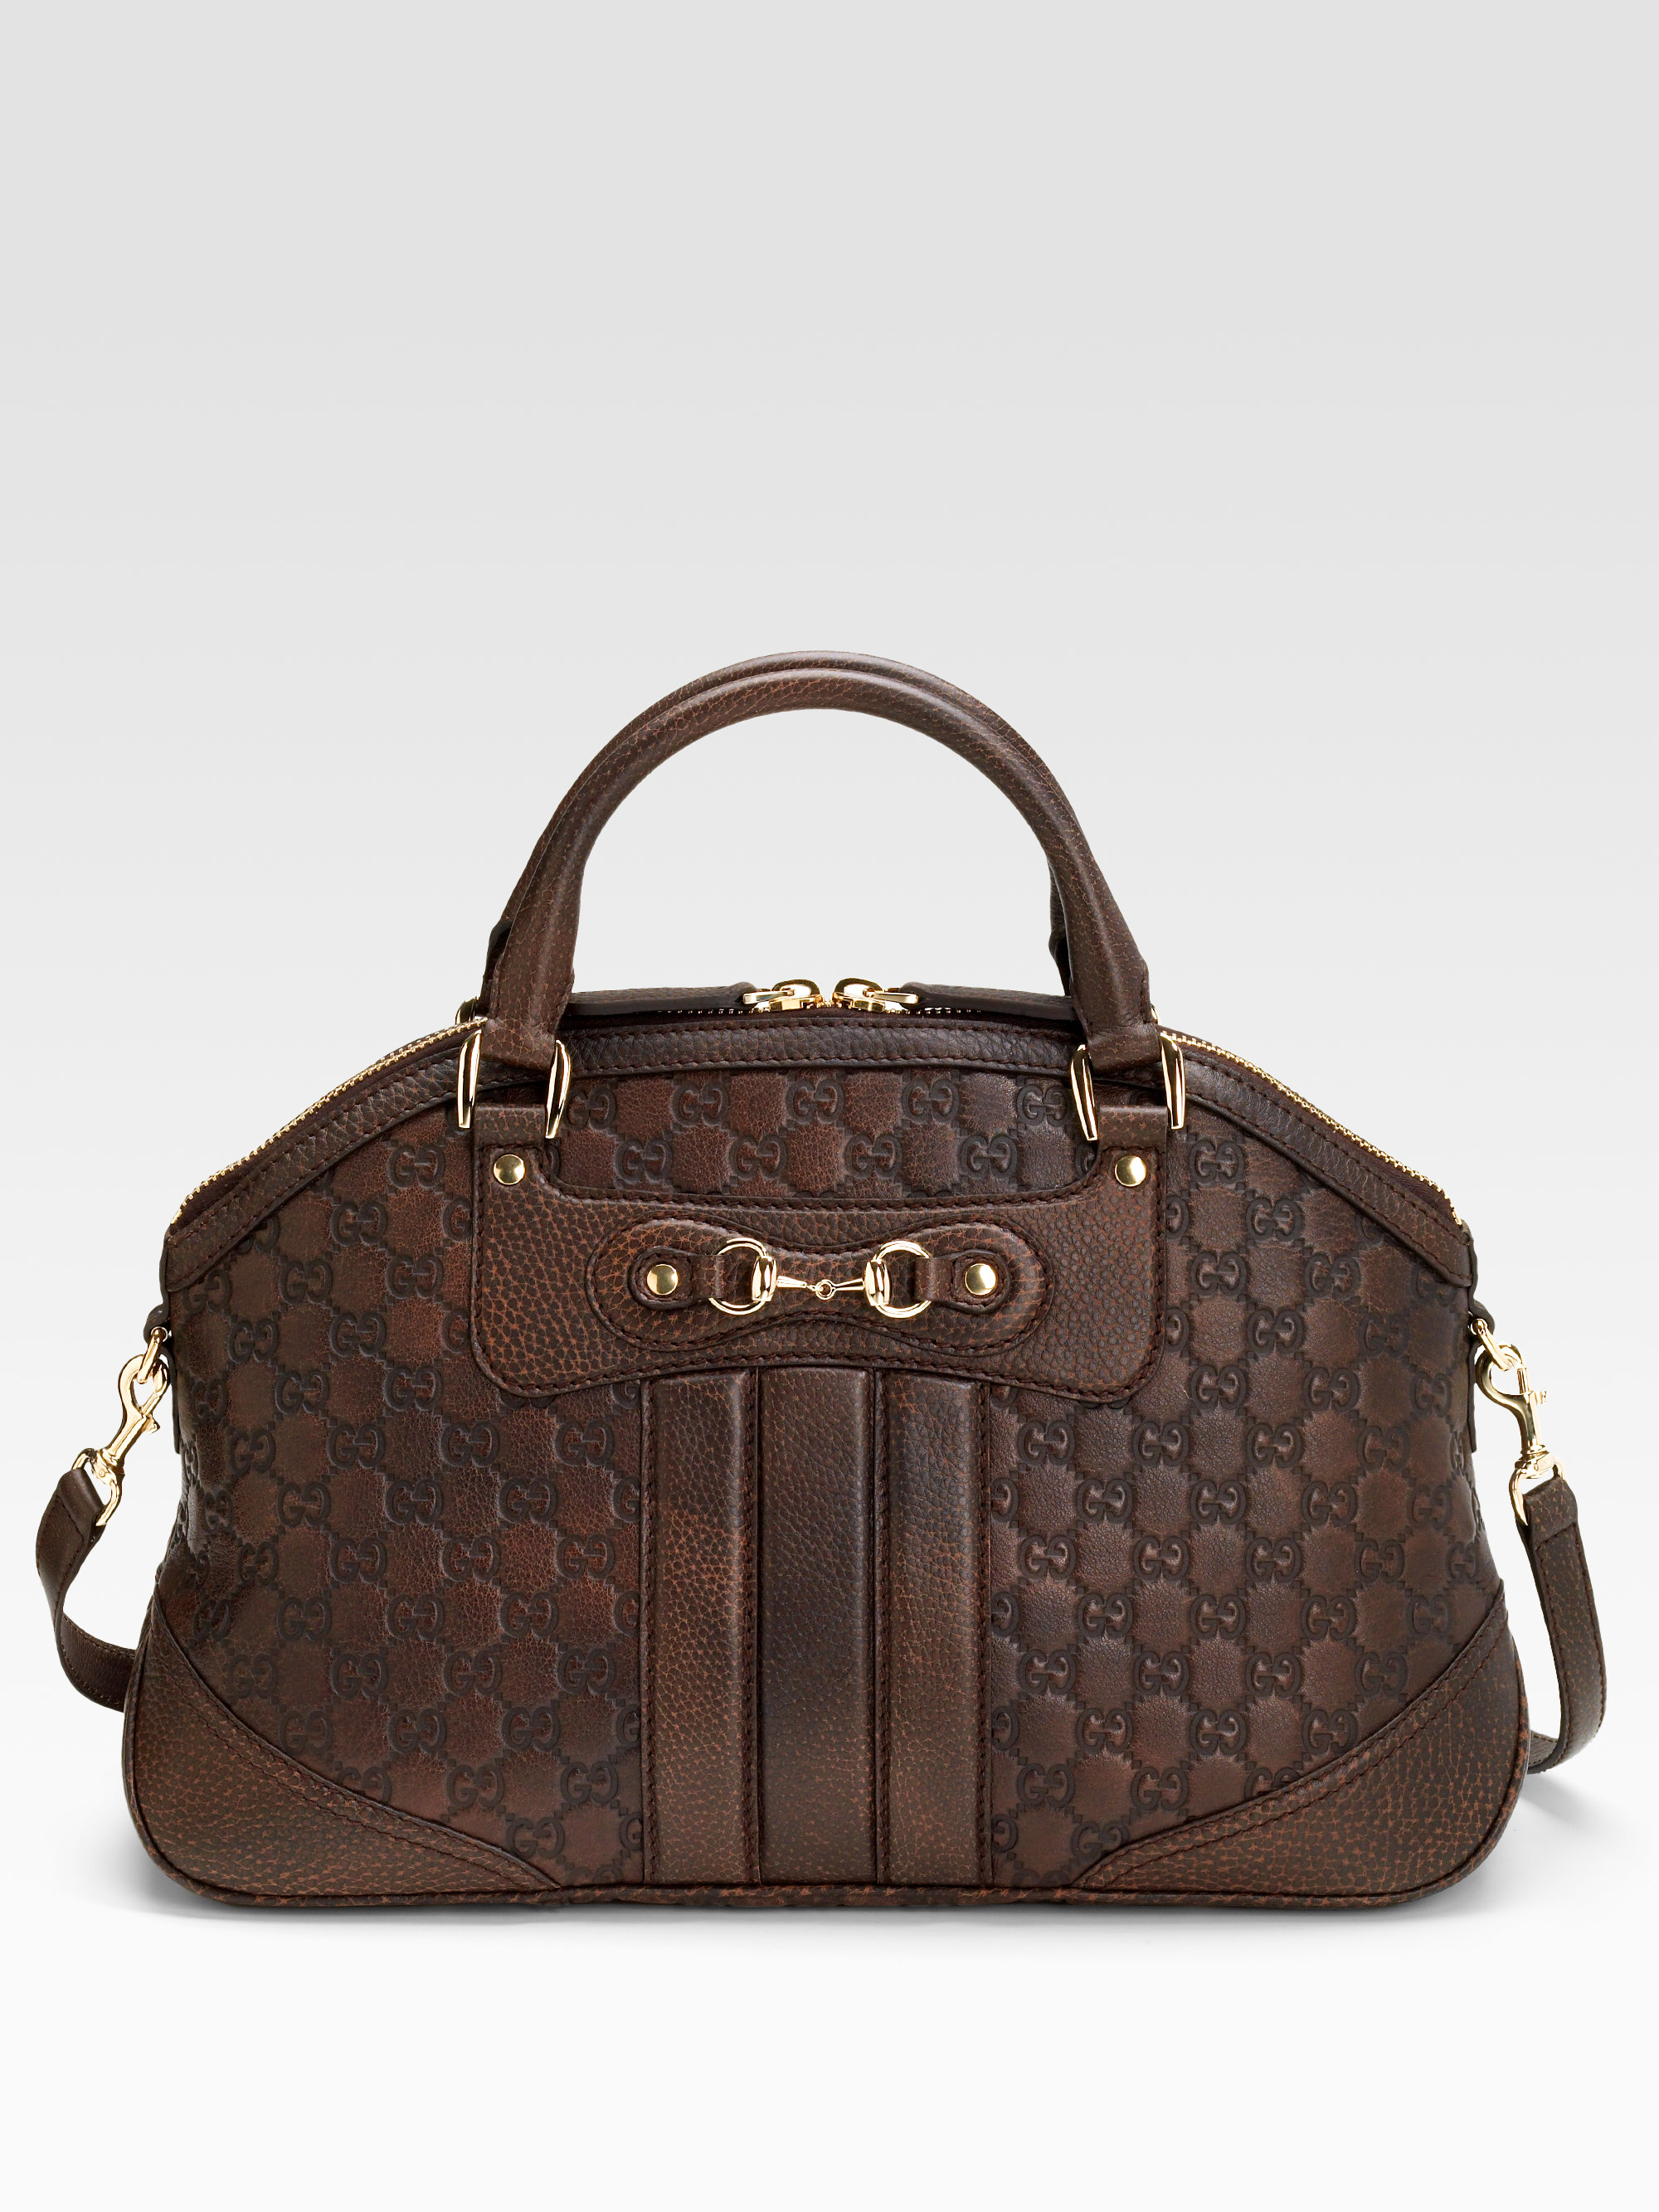 Gucci Catherine Ssima Medium Dome Satchel in Brown | Lyst